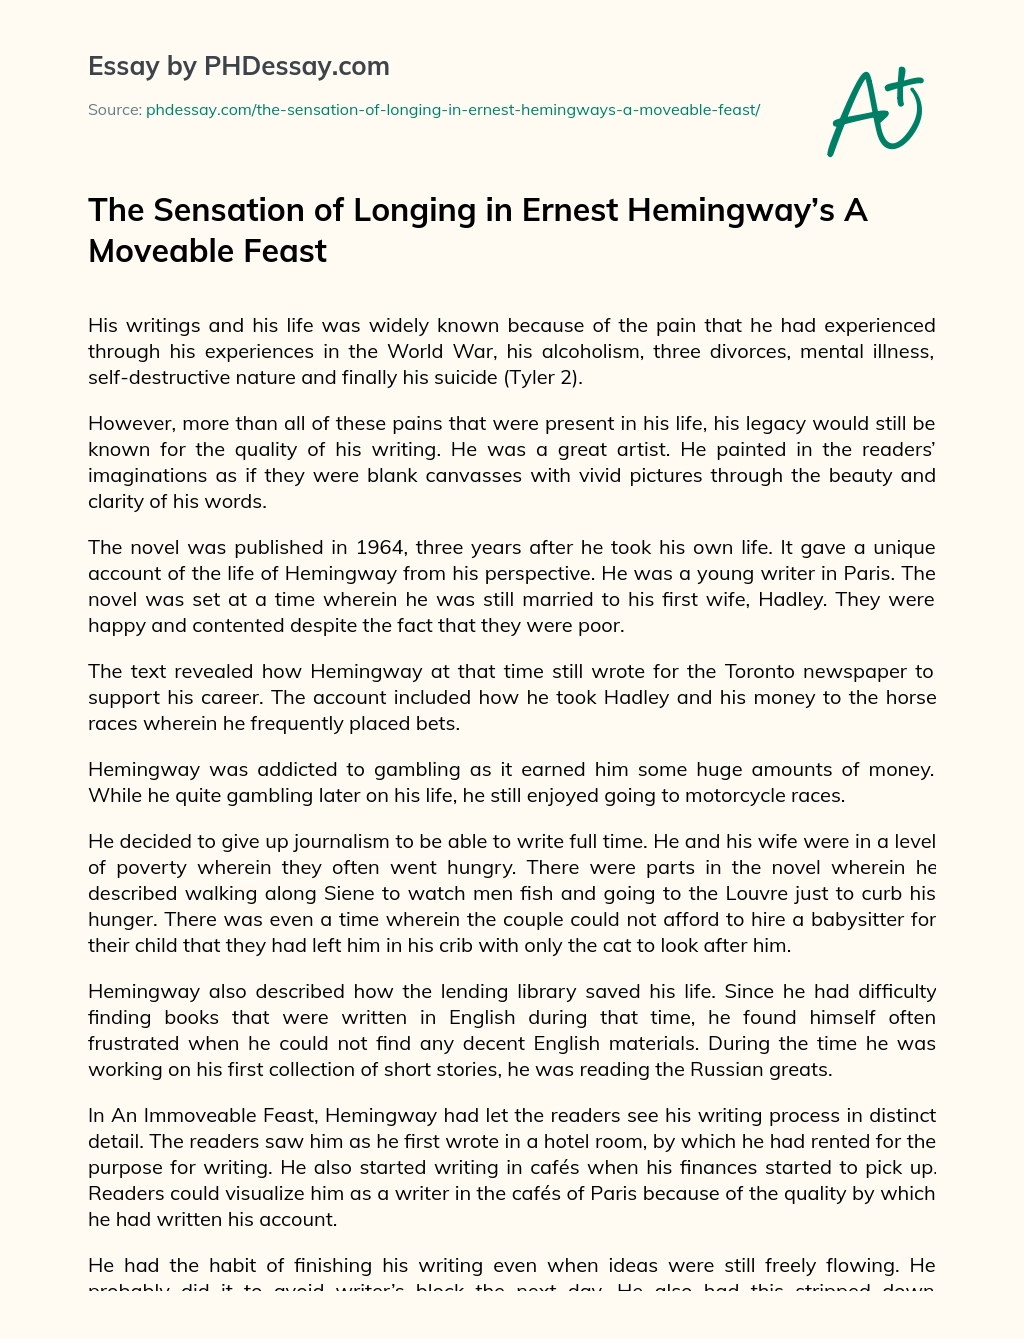 The Sensation of Longing in Ernest Hemingway’s A Moveable Feast essay